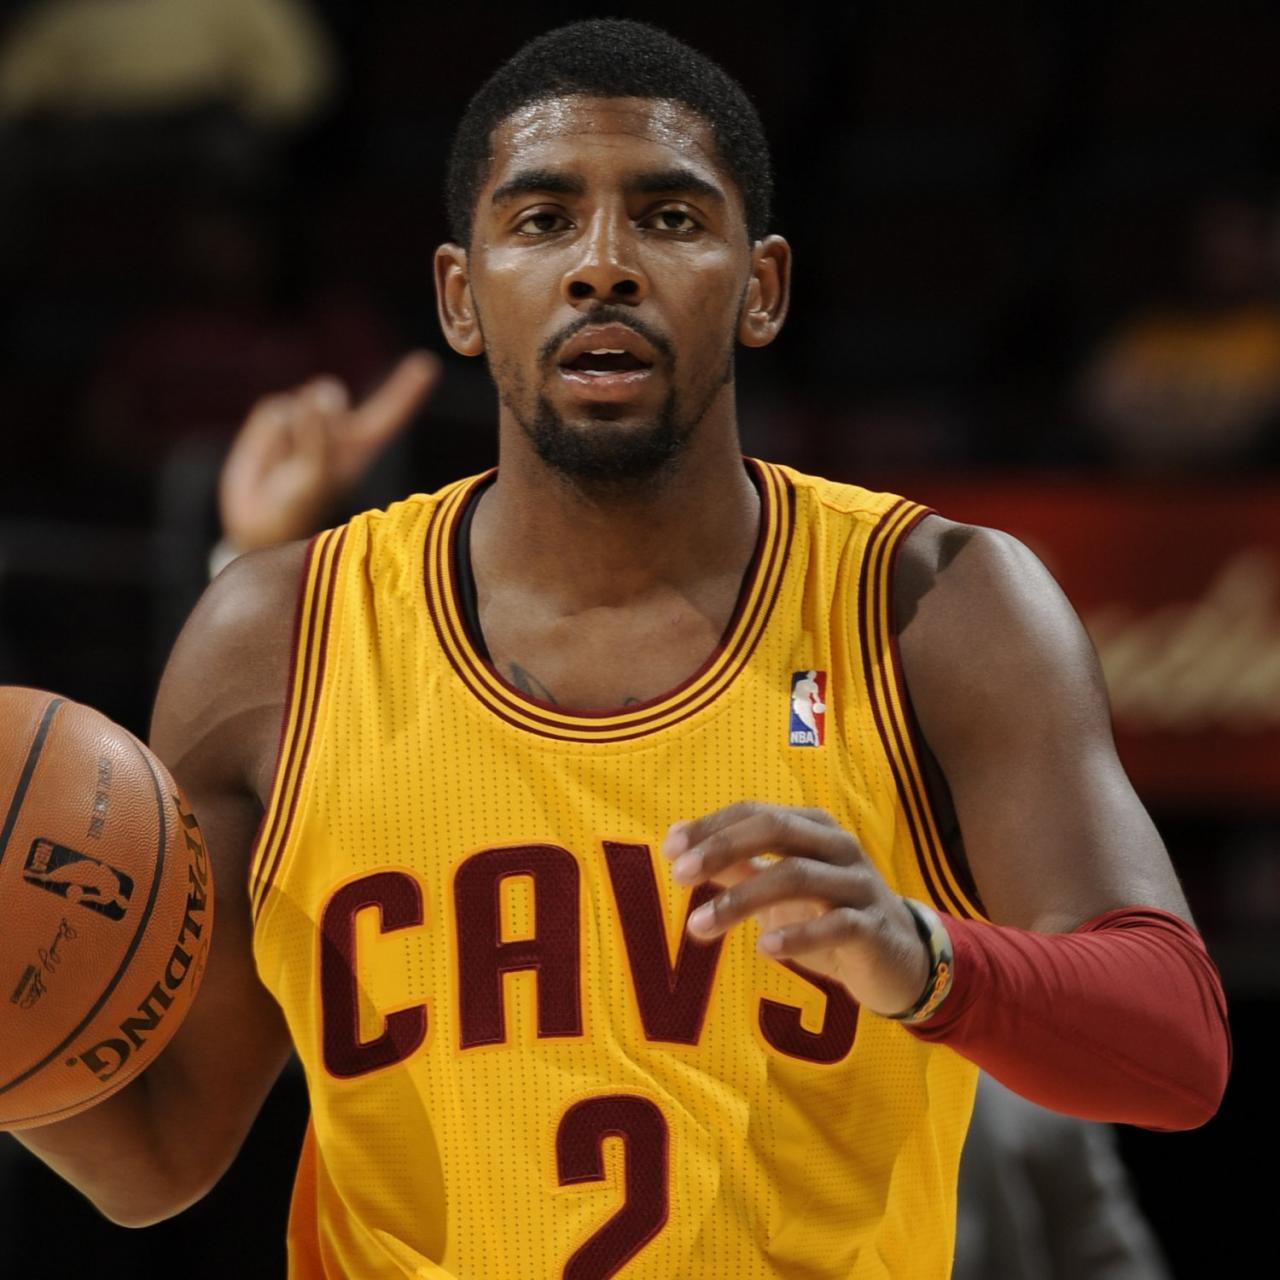 Kyrie Irving A Dynamic Enigma on and Off the Court